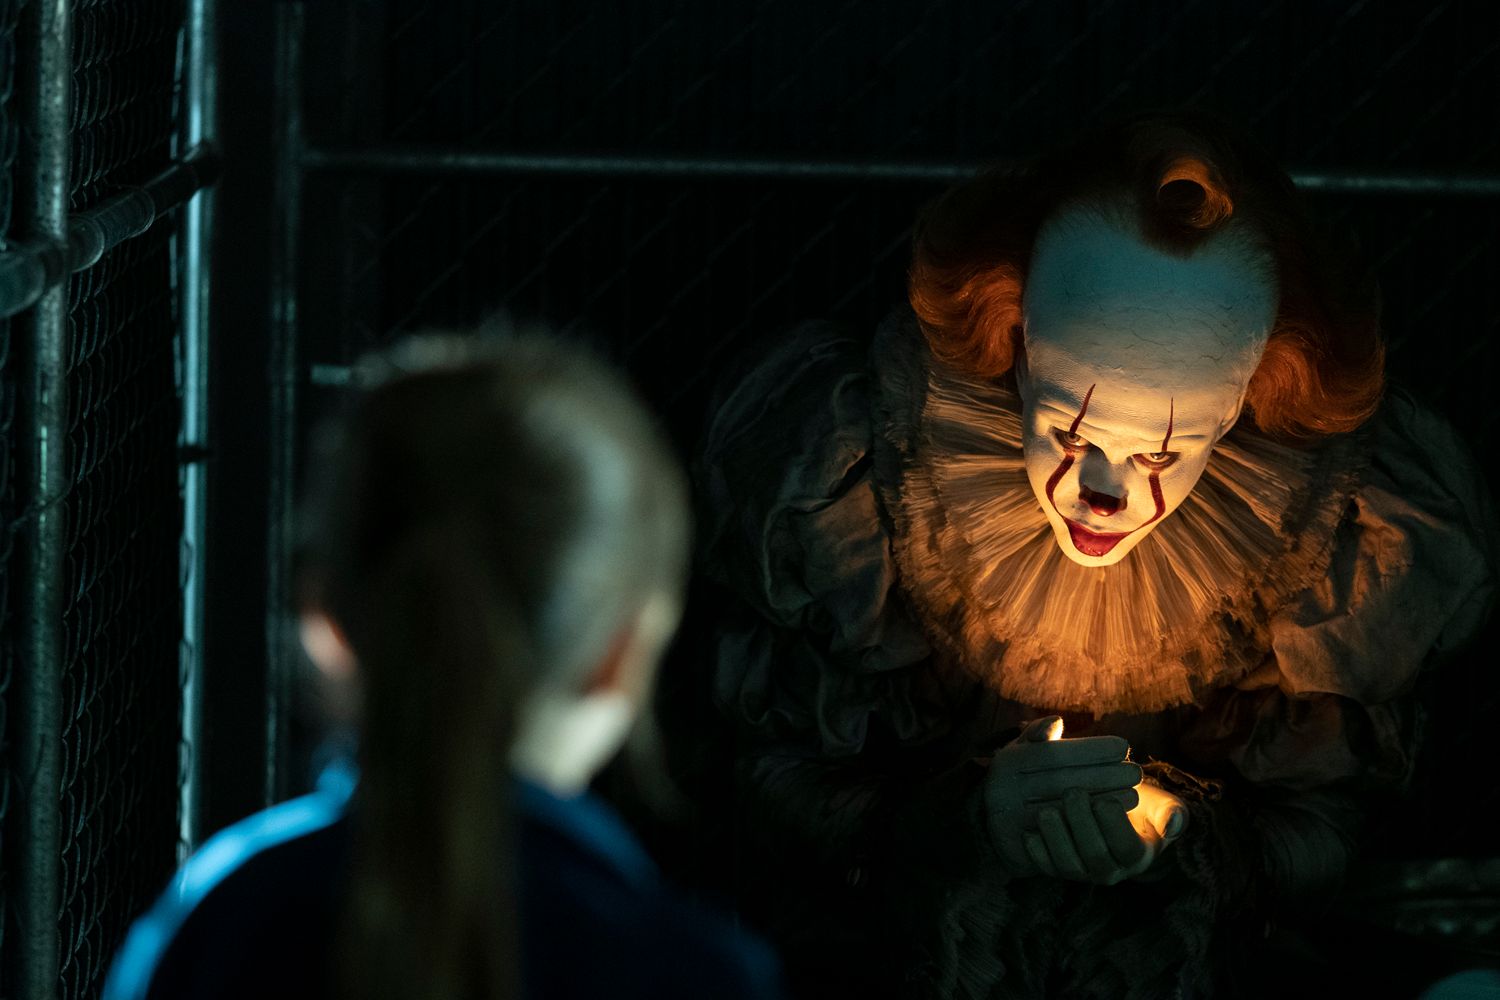 It Movie Timeline Explained: A Complete Guide to the History of ...